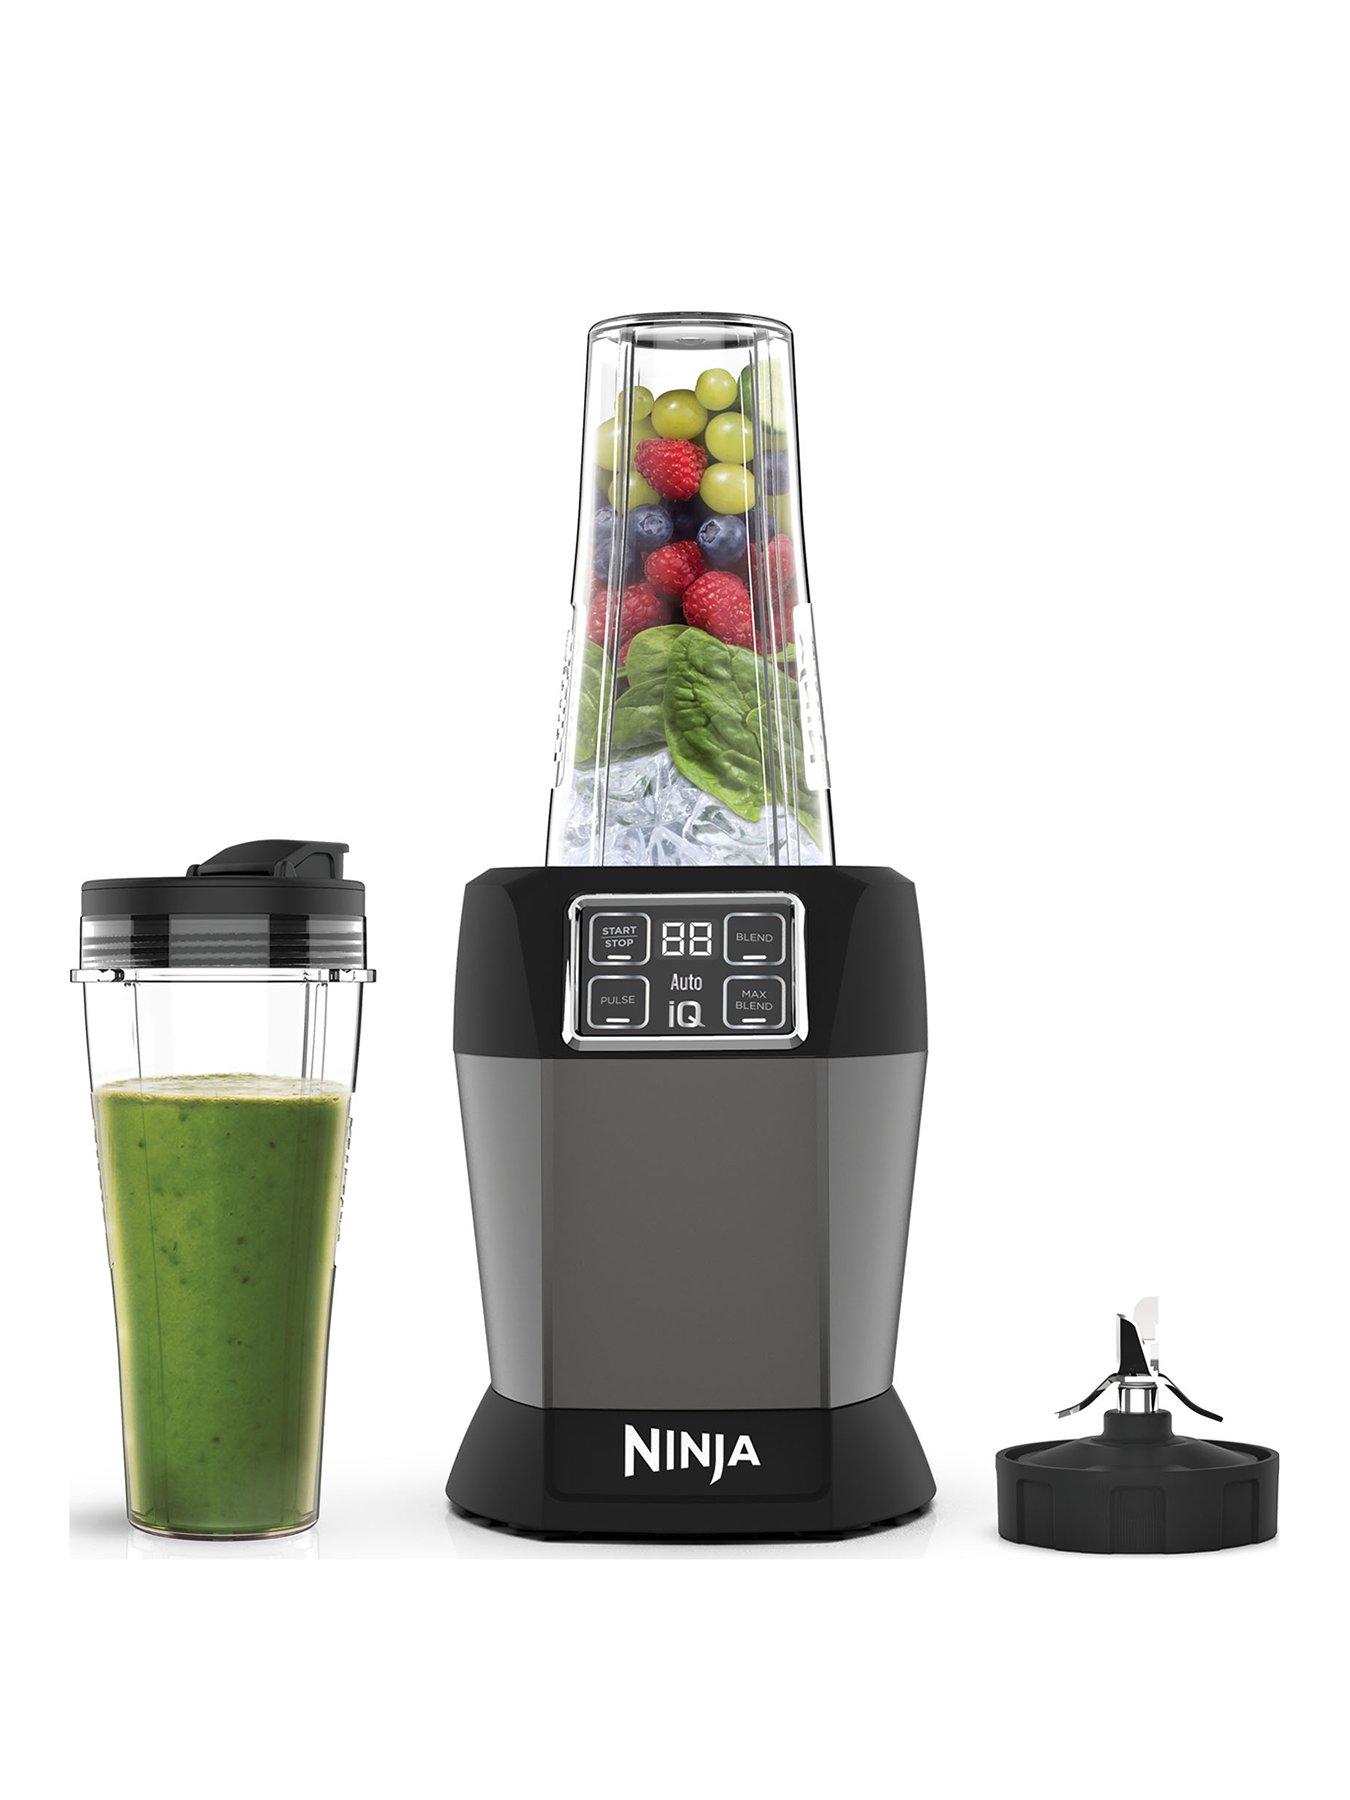 24-Hour Flash Deal: Get a $120 Ninja Foodi Power Mixer System for $75